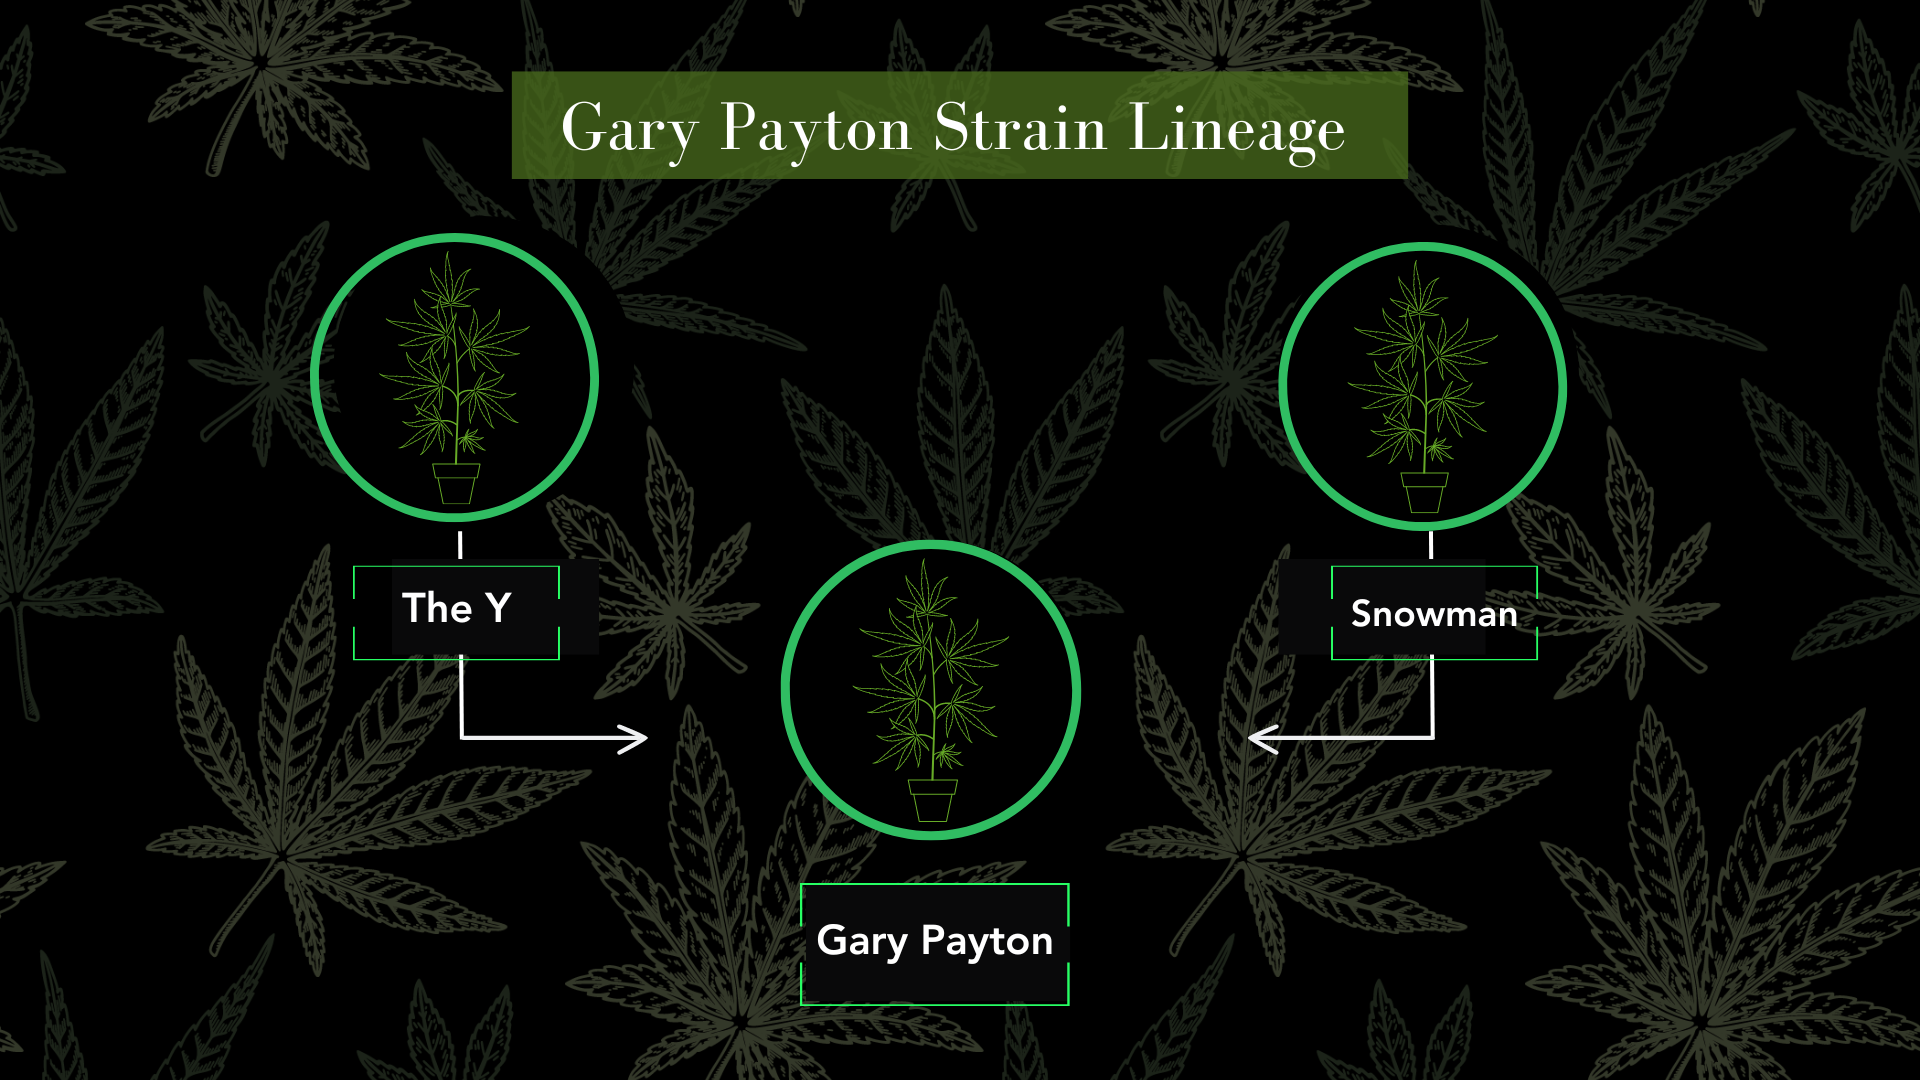 visual infographic of the gary payton strain lineage from the Y strain and Snowman strain